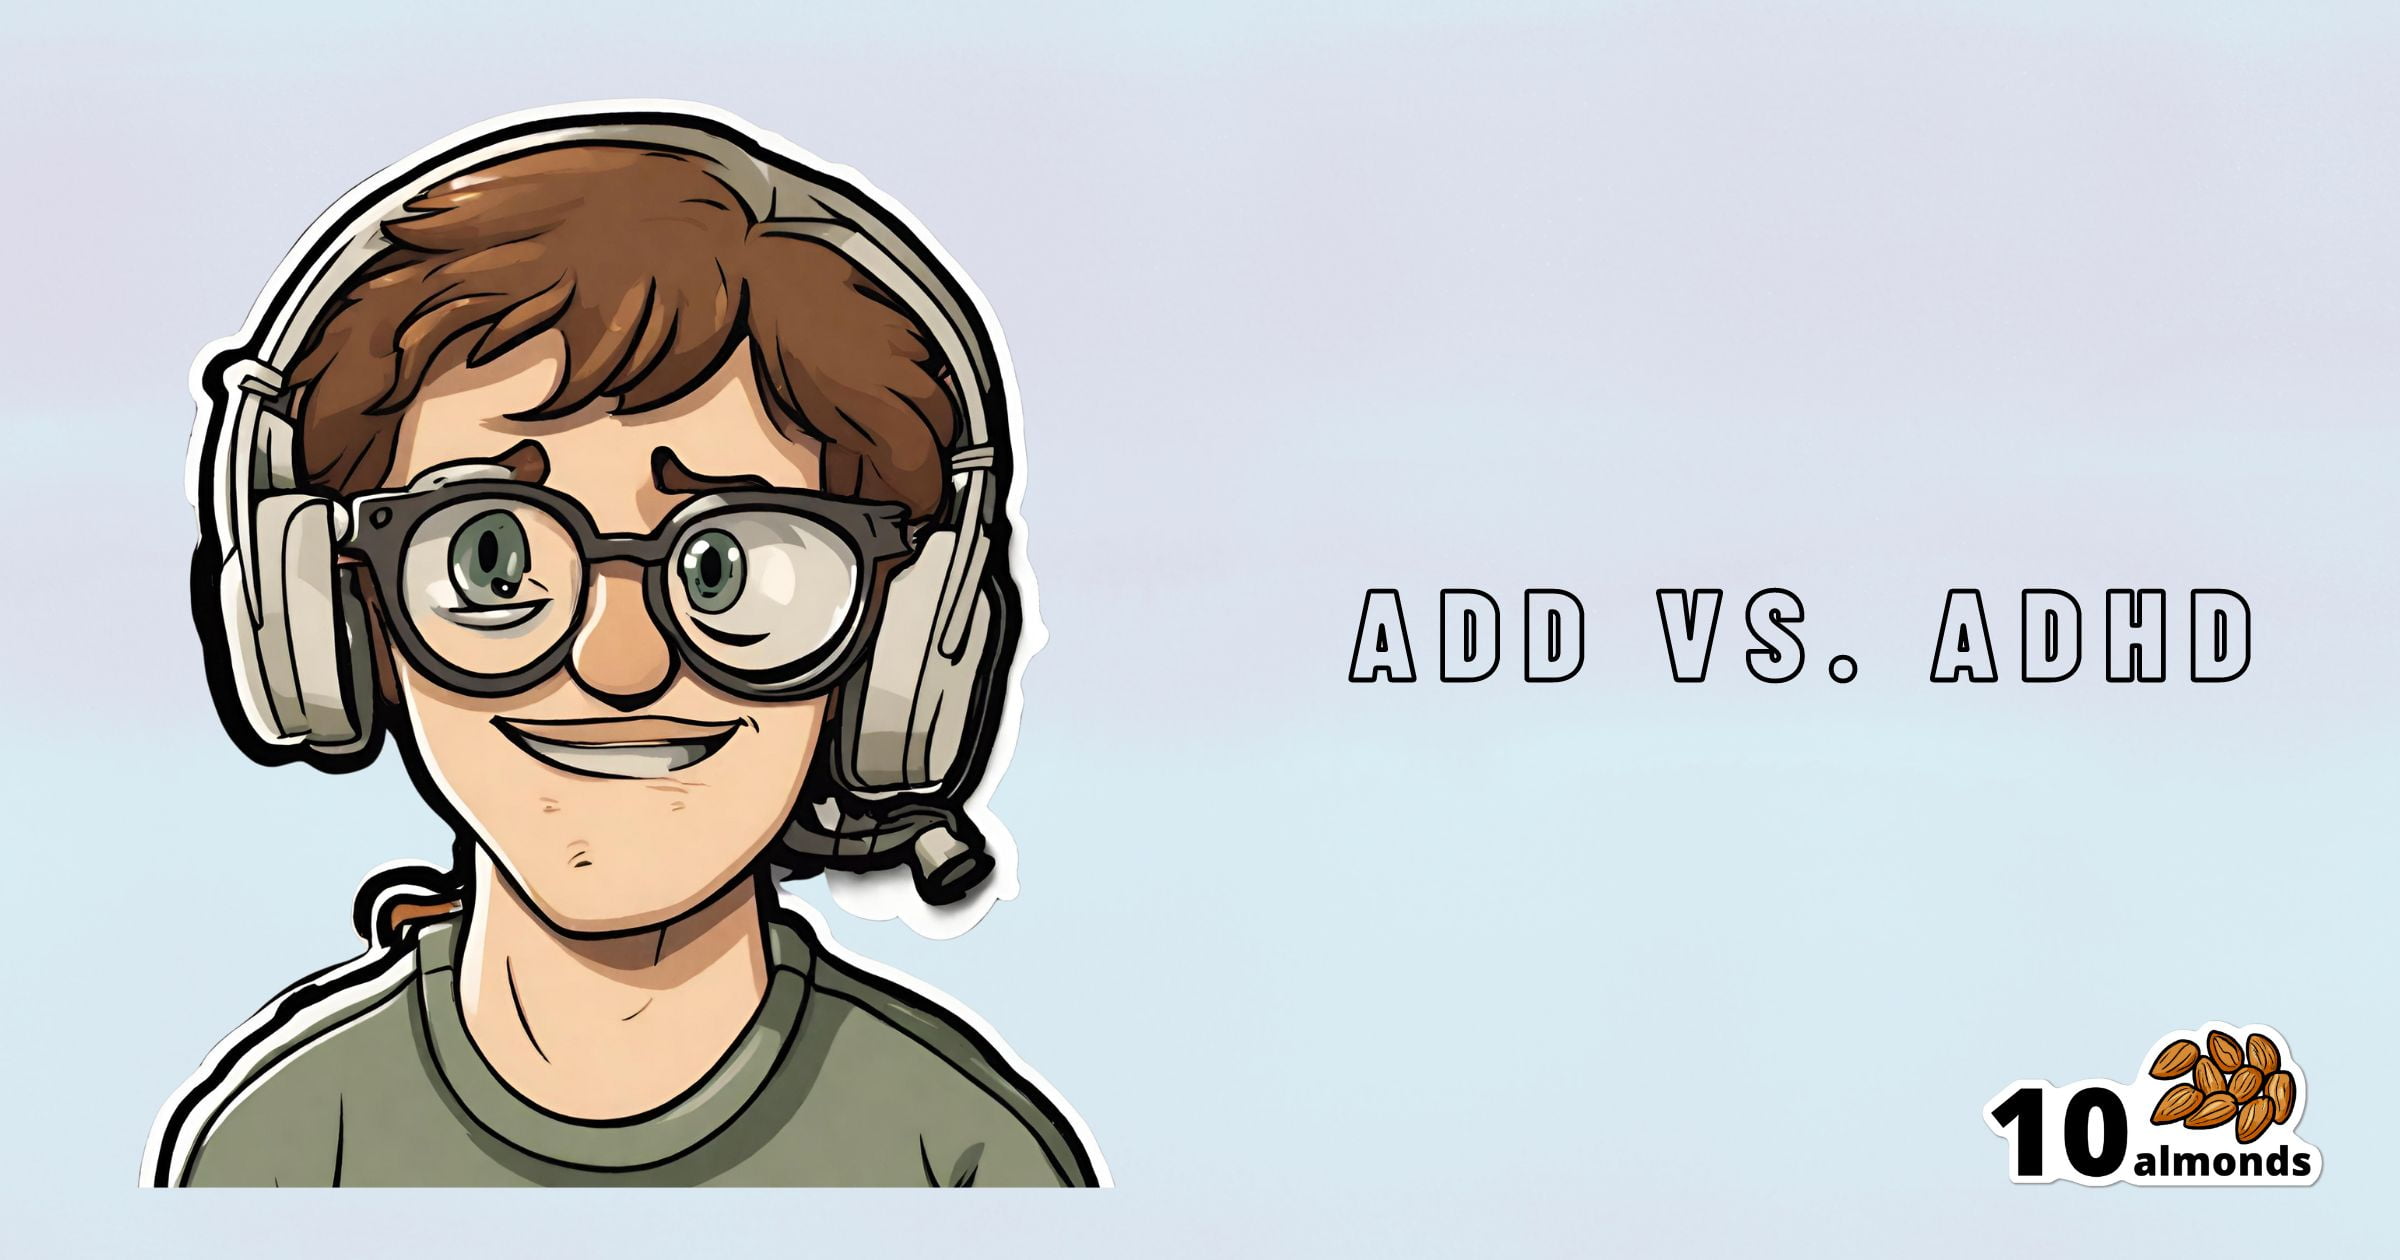 A cartoon character with short brown hair, glasses, and a headset is smiling. Next to the character, the text "ADD vs. ADHD: understanding the difference" is written. In the bottom right corner, the logo "10 almonds" is displayed. The background is light blue.